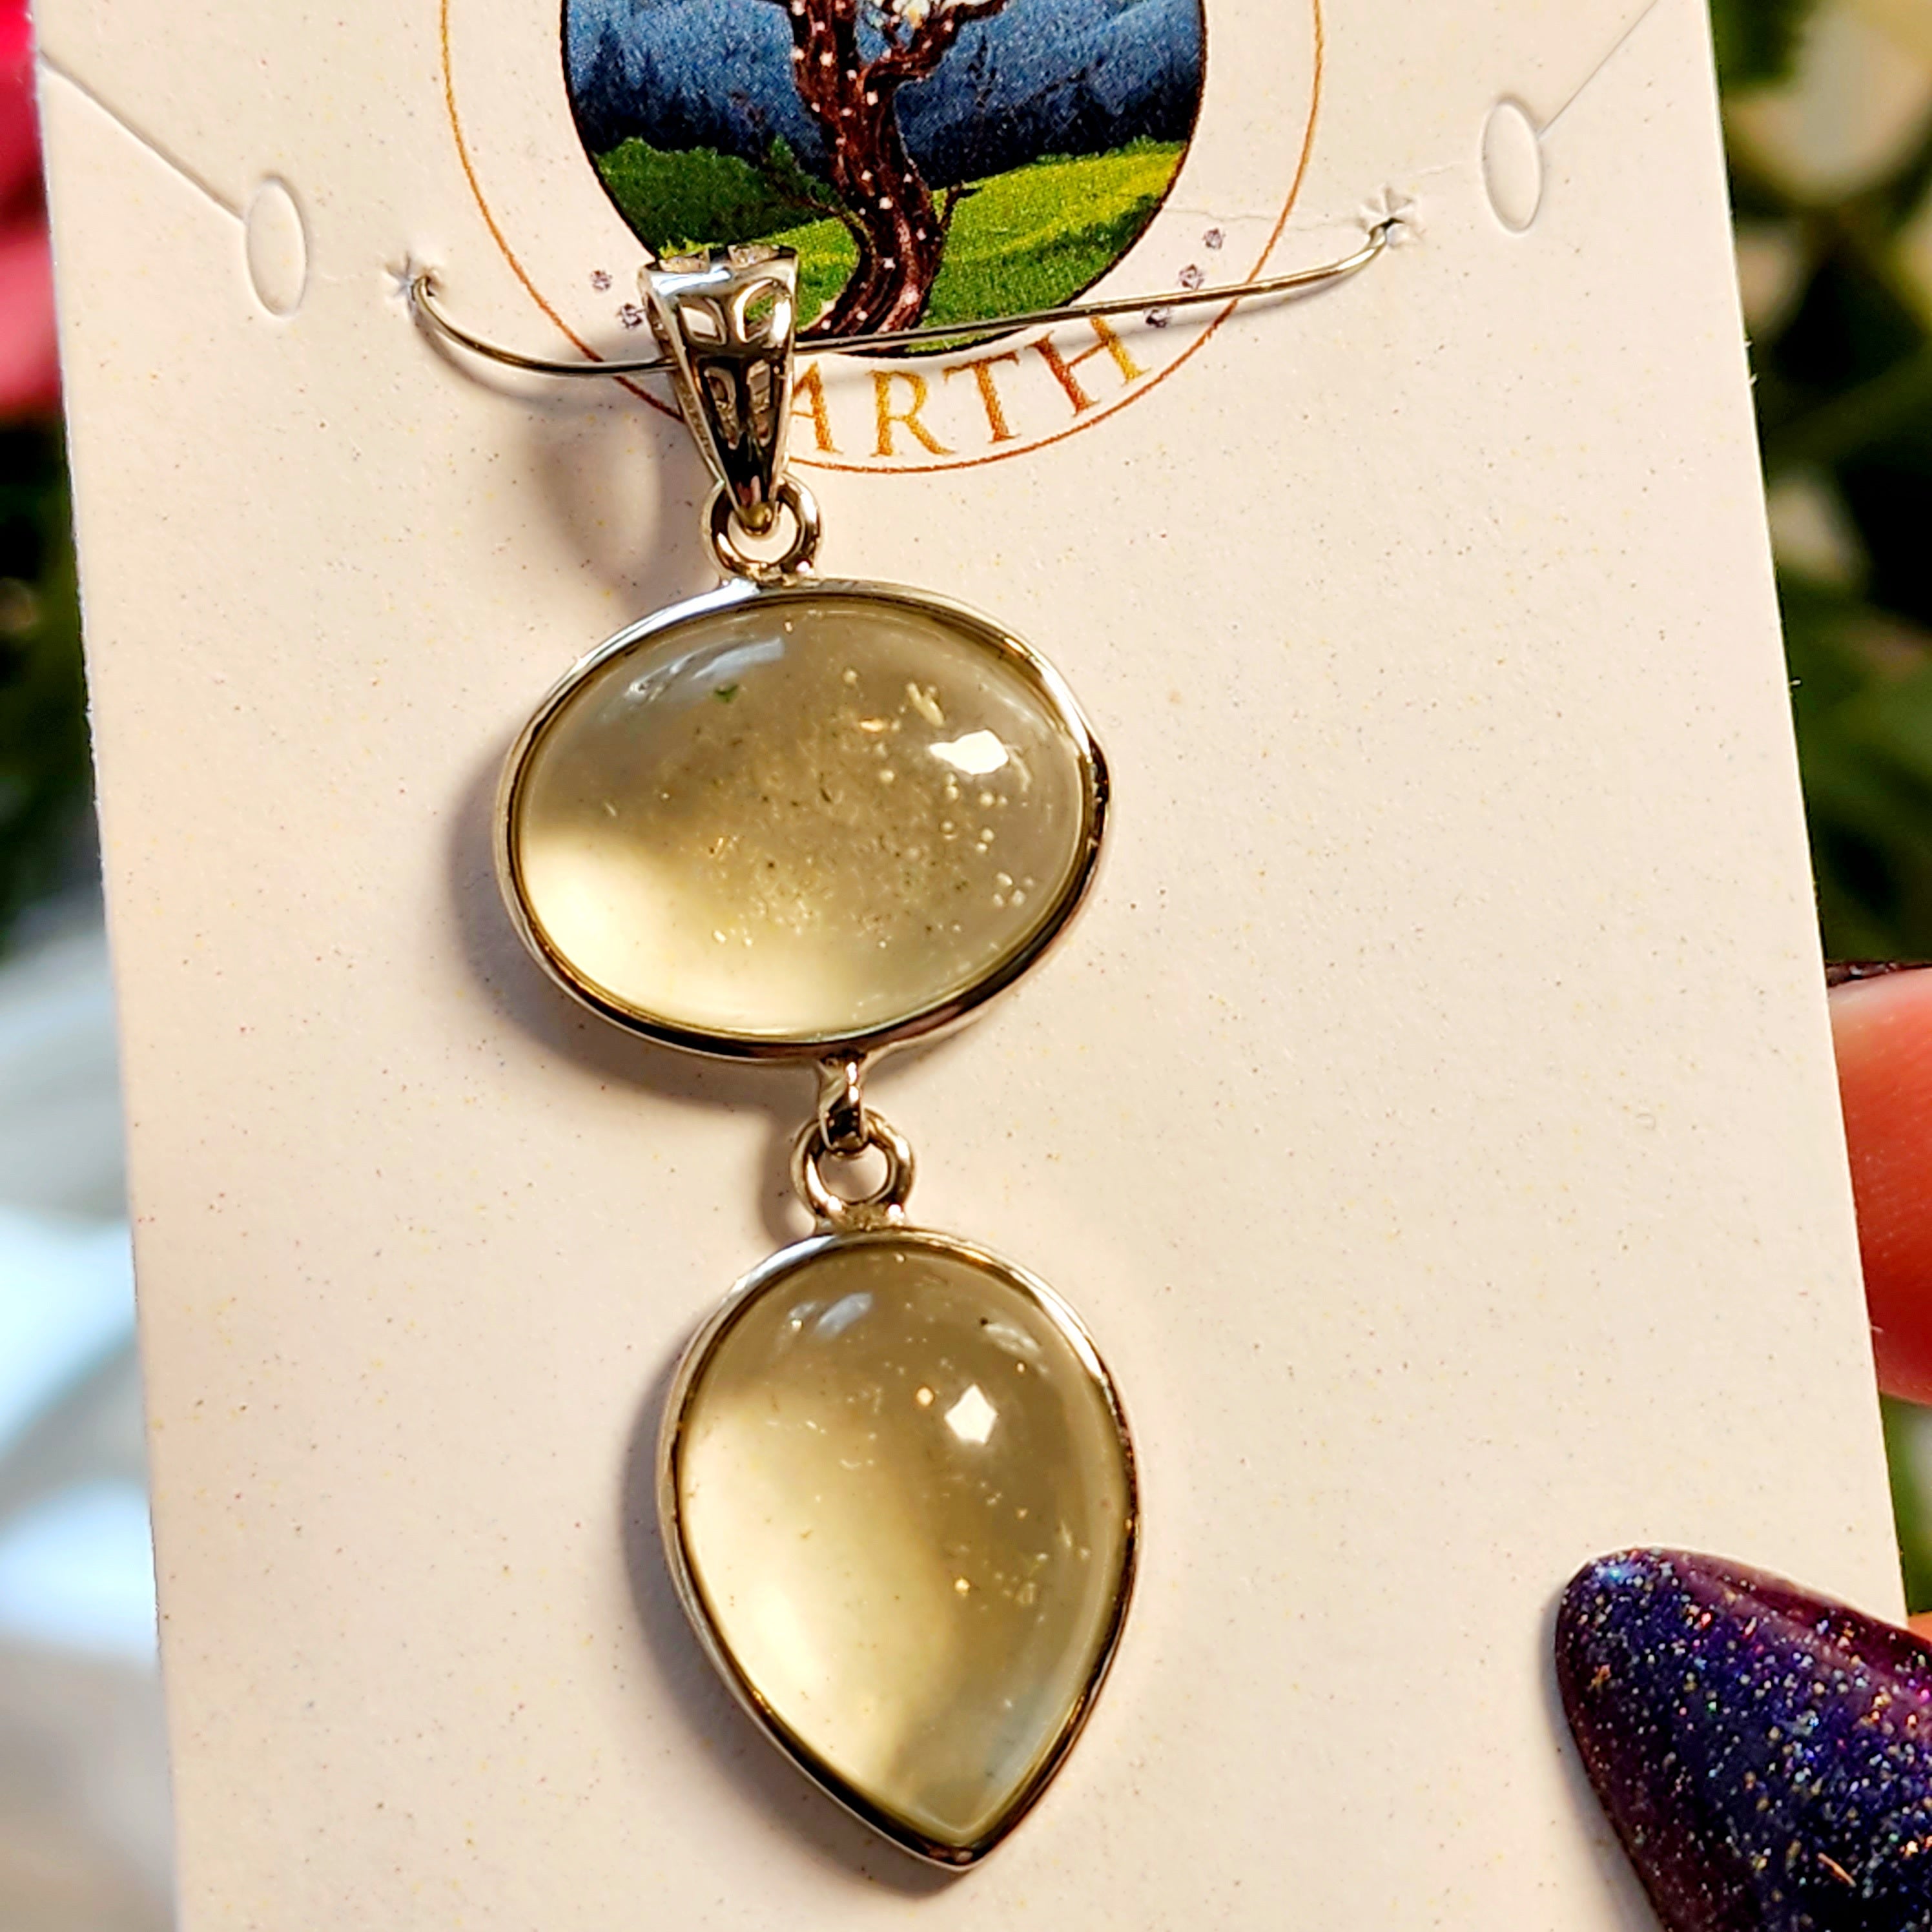 Libyan Desert Glass Double Pendant .925 Silver for Confidence, Manifesting and Personal Power